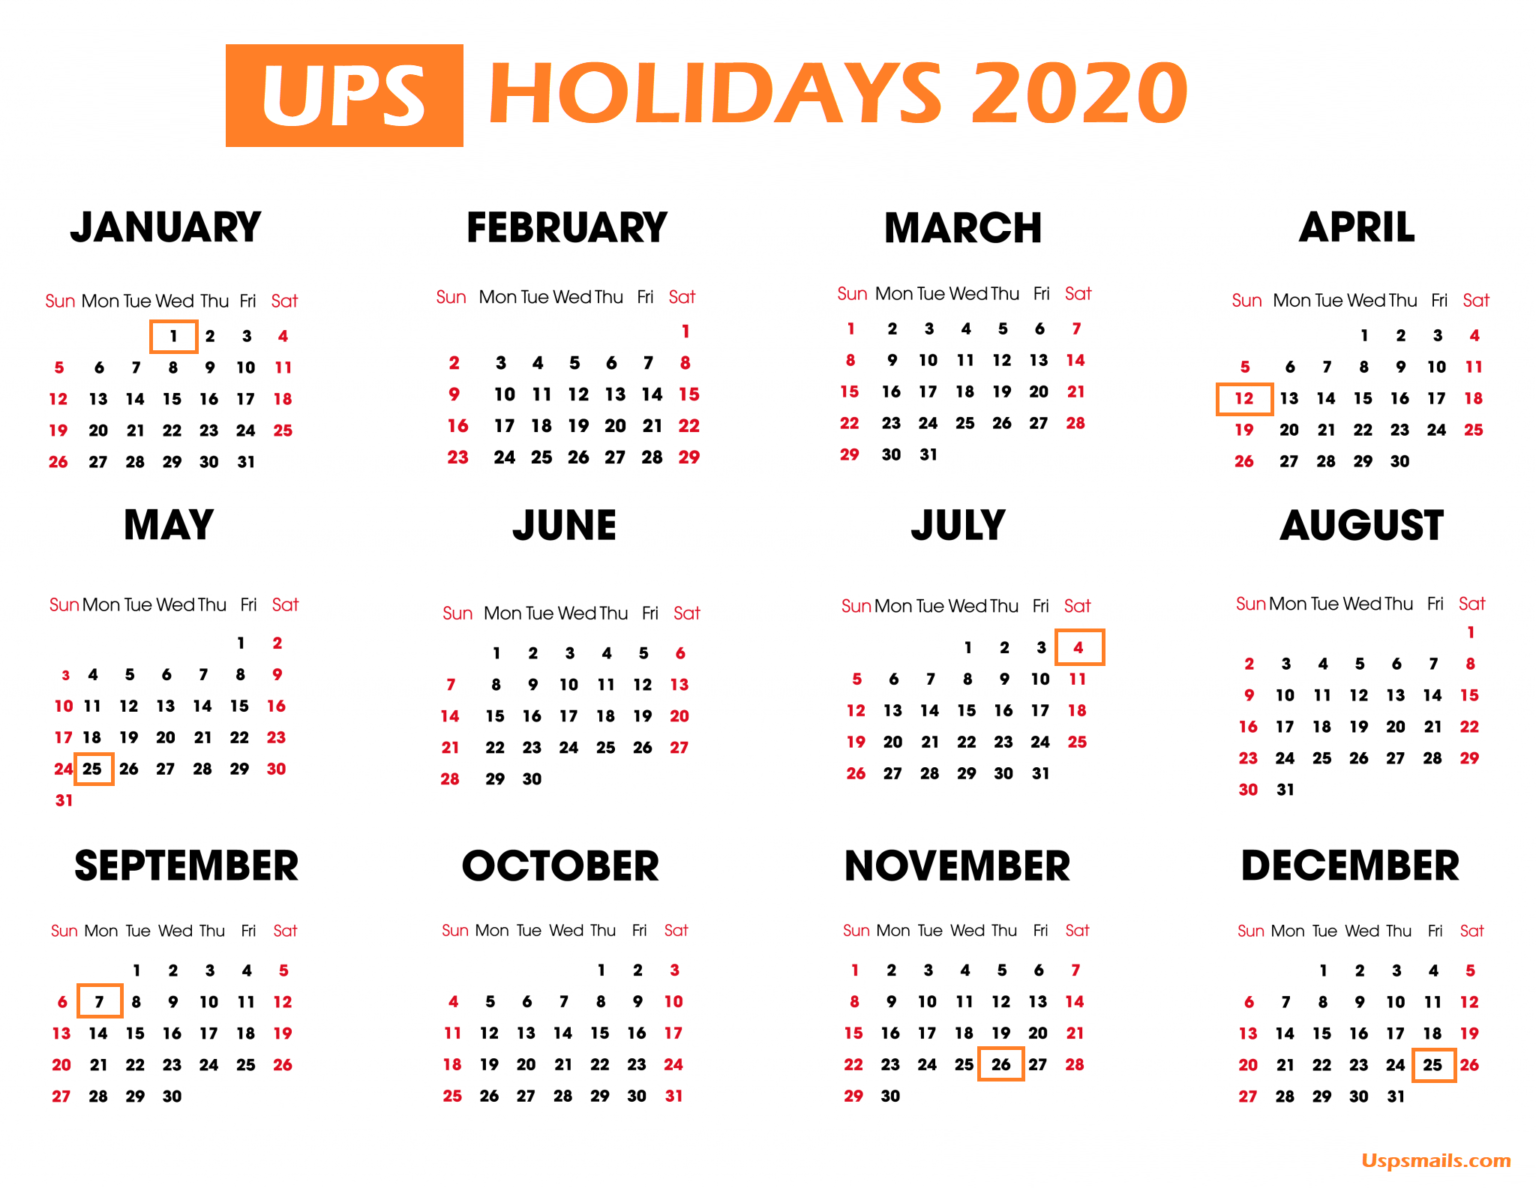 UPS Holidays 2020 List of UPS Holidays with Schedule